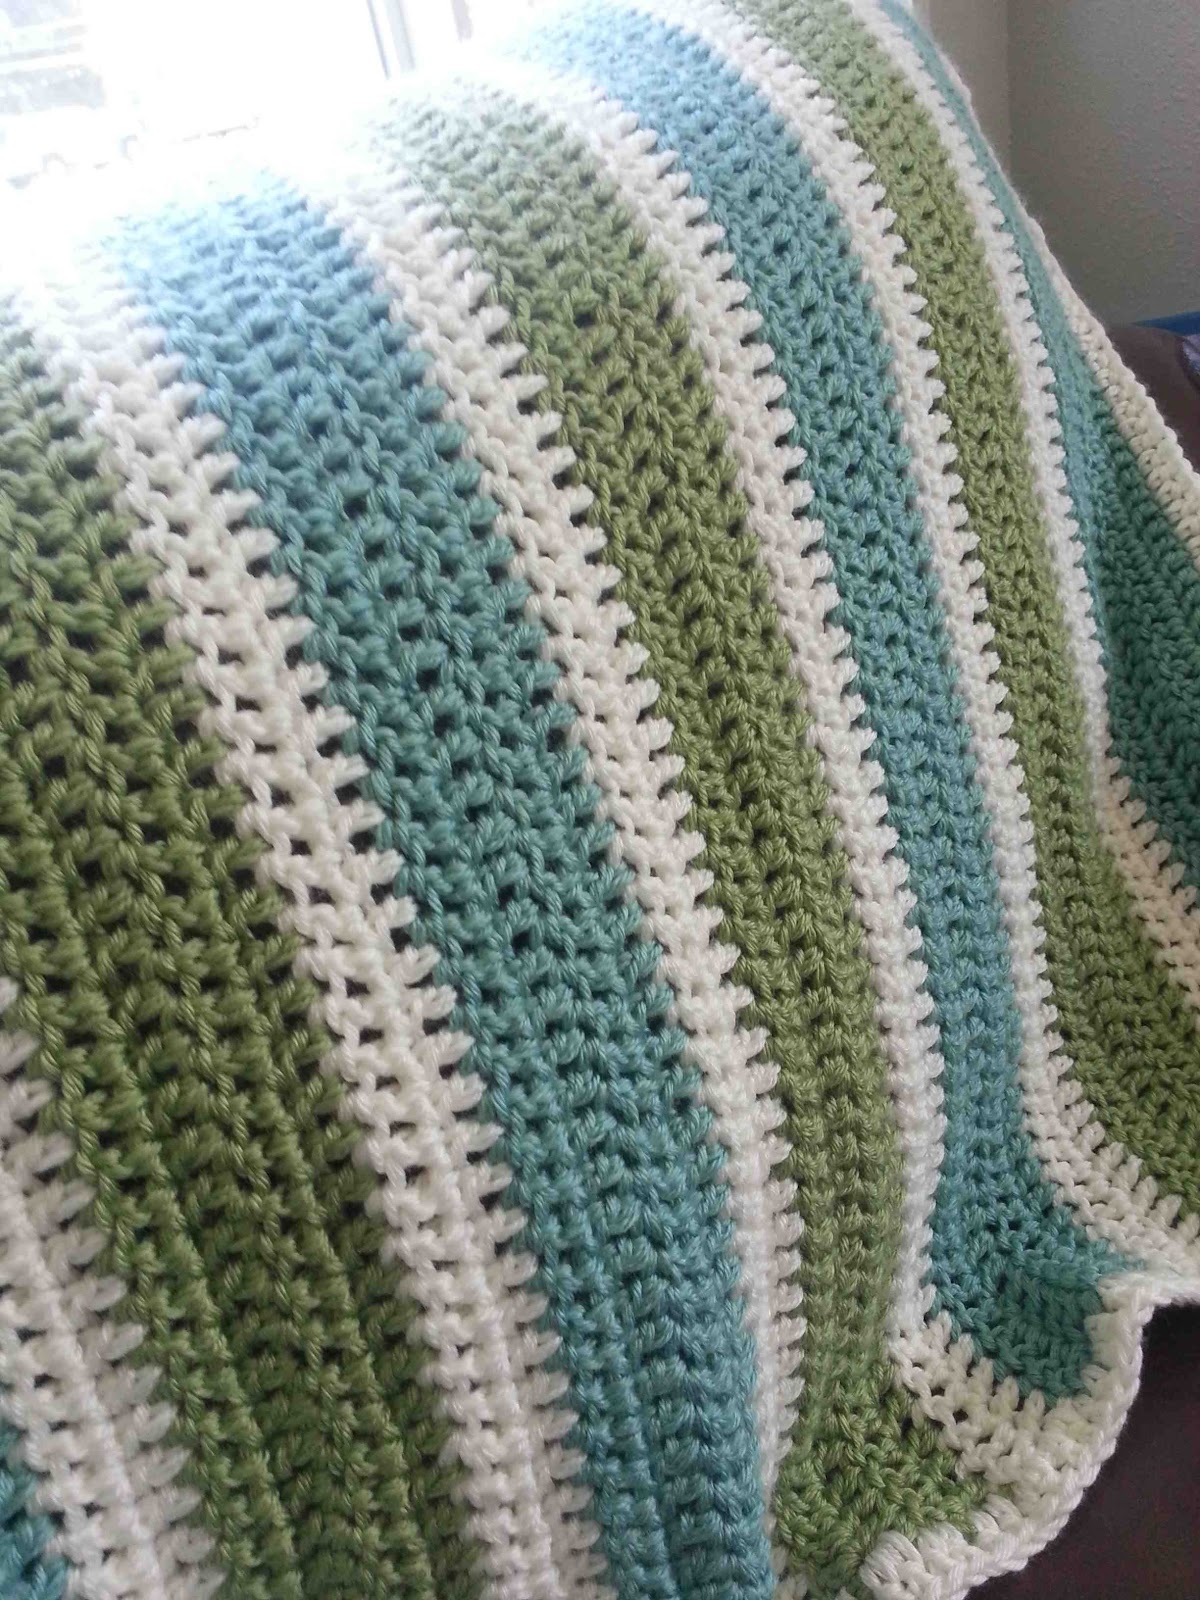 Made By Me. Shared With You.: Striped Crochet Afghan